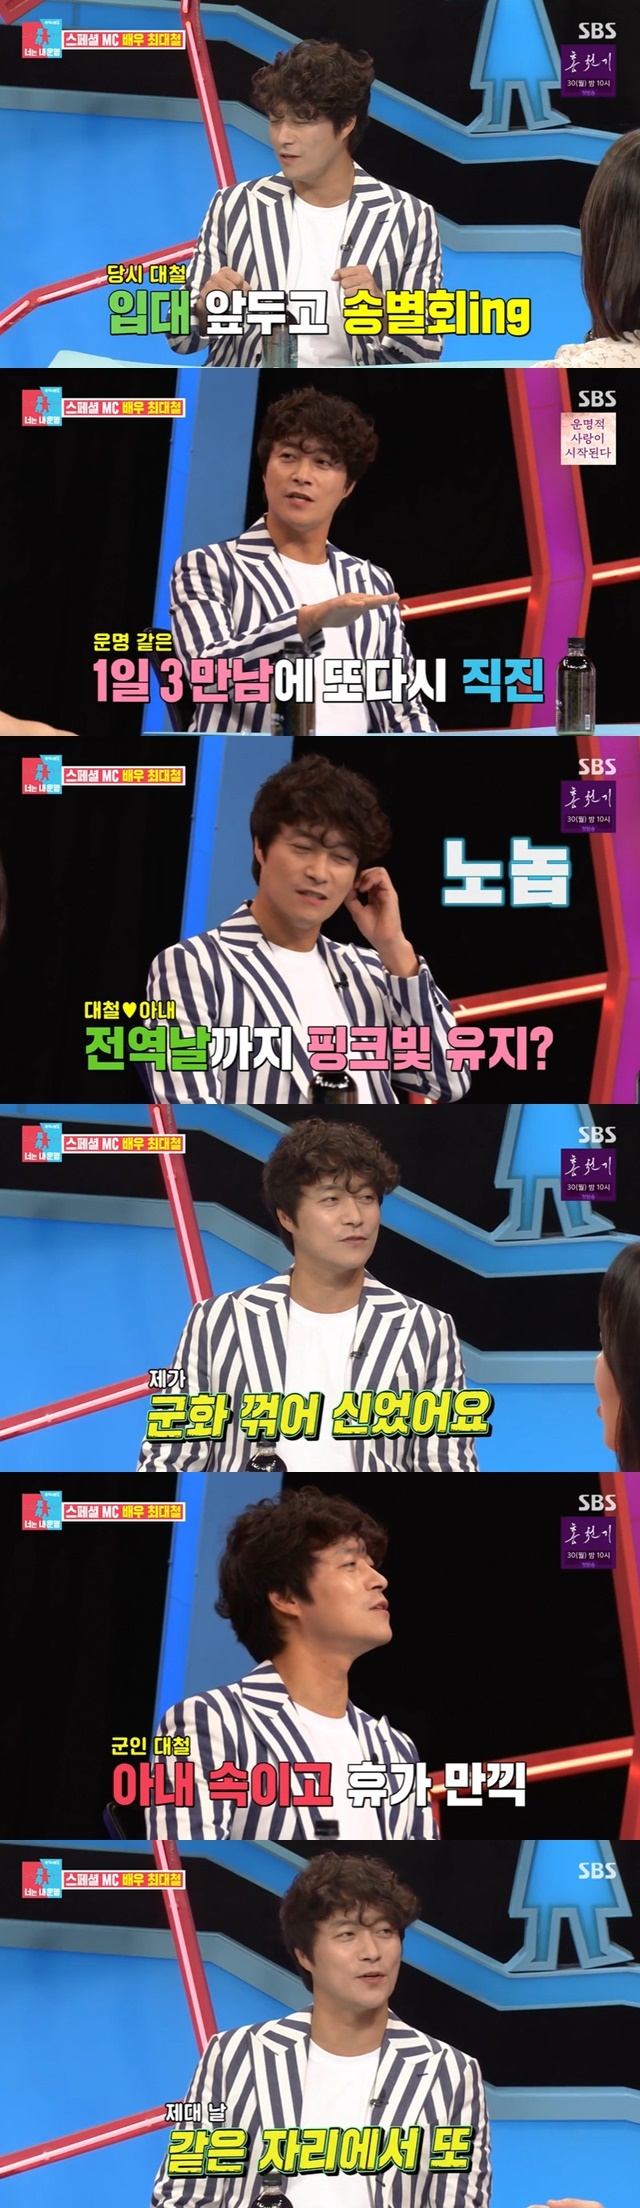 Choi Dae-chul Confessions Love Story With WifeSpecial MC actor Choi Dae-chul appeared on SBSs Dongsangmong Season 2-You Are My Destiny, which was broadcast on August 16.Kim Gura said, Choi Dae-chul is pure and straight.I first met her on the street when I was twenty-one and it was so clean, it felt more innocent than pretty. White, Choi Dae-chul said.When Kim Sook asked, Are you waiting for the military to take the number? Choi Dae-chul said, I didnt wait, I broke my boots. I didnt say I was on vacation.I wanted to be free. I got caught out meeting friends and other women.So I did not contact him, but now he said he did not forget it and circled it on the date of discharge. 